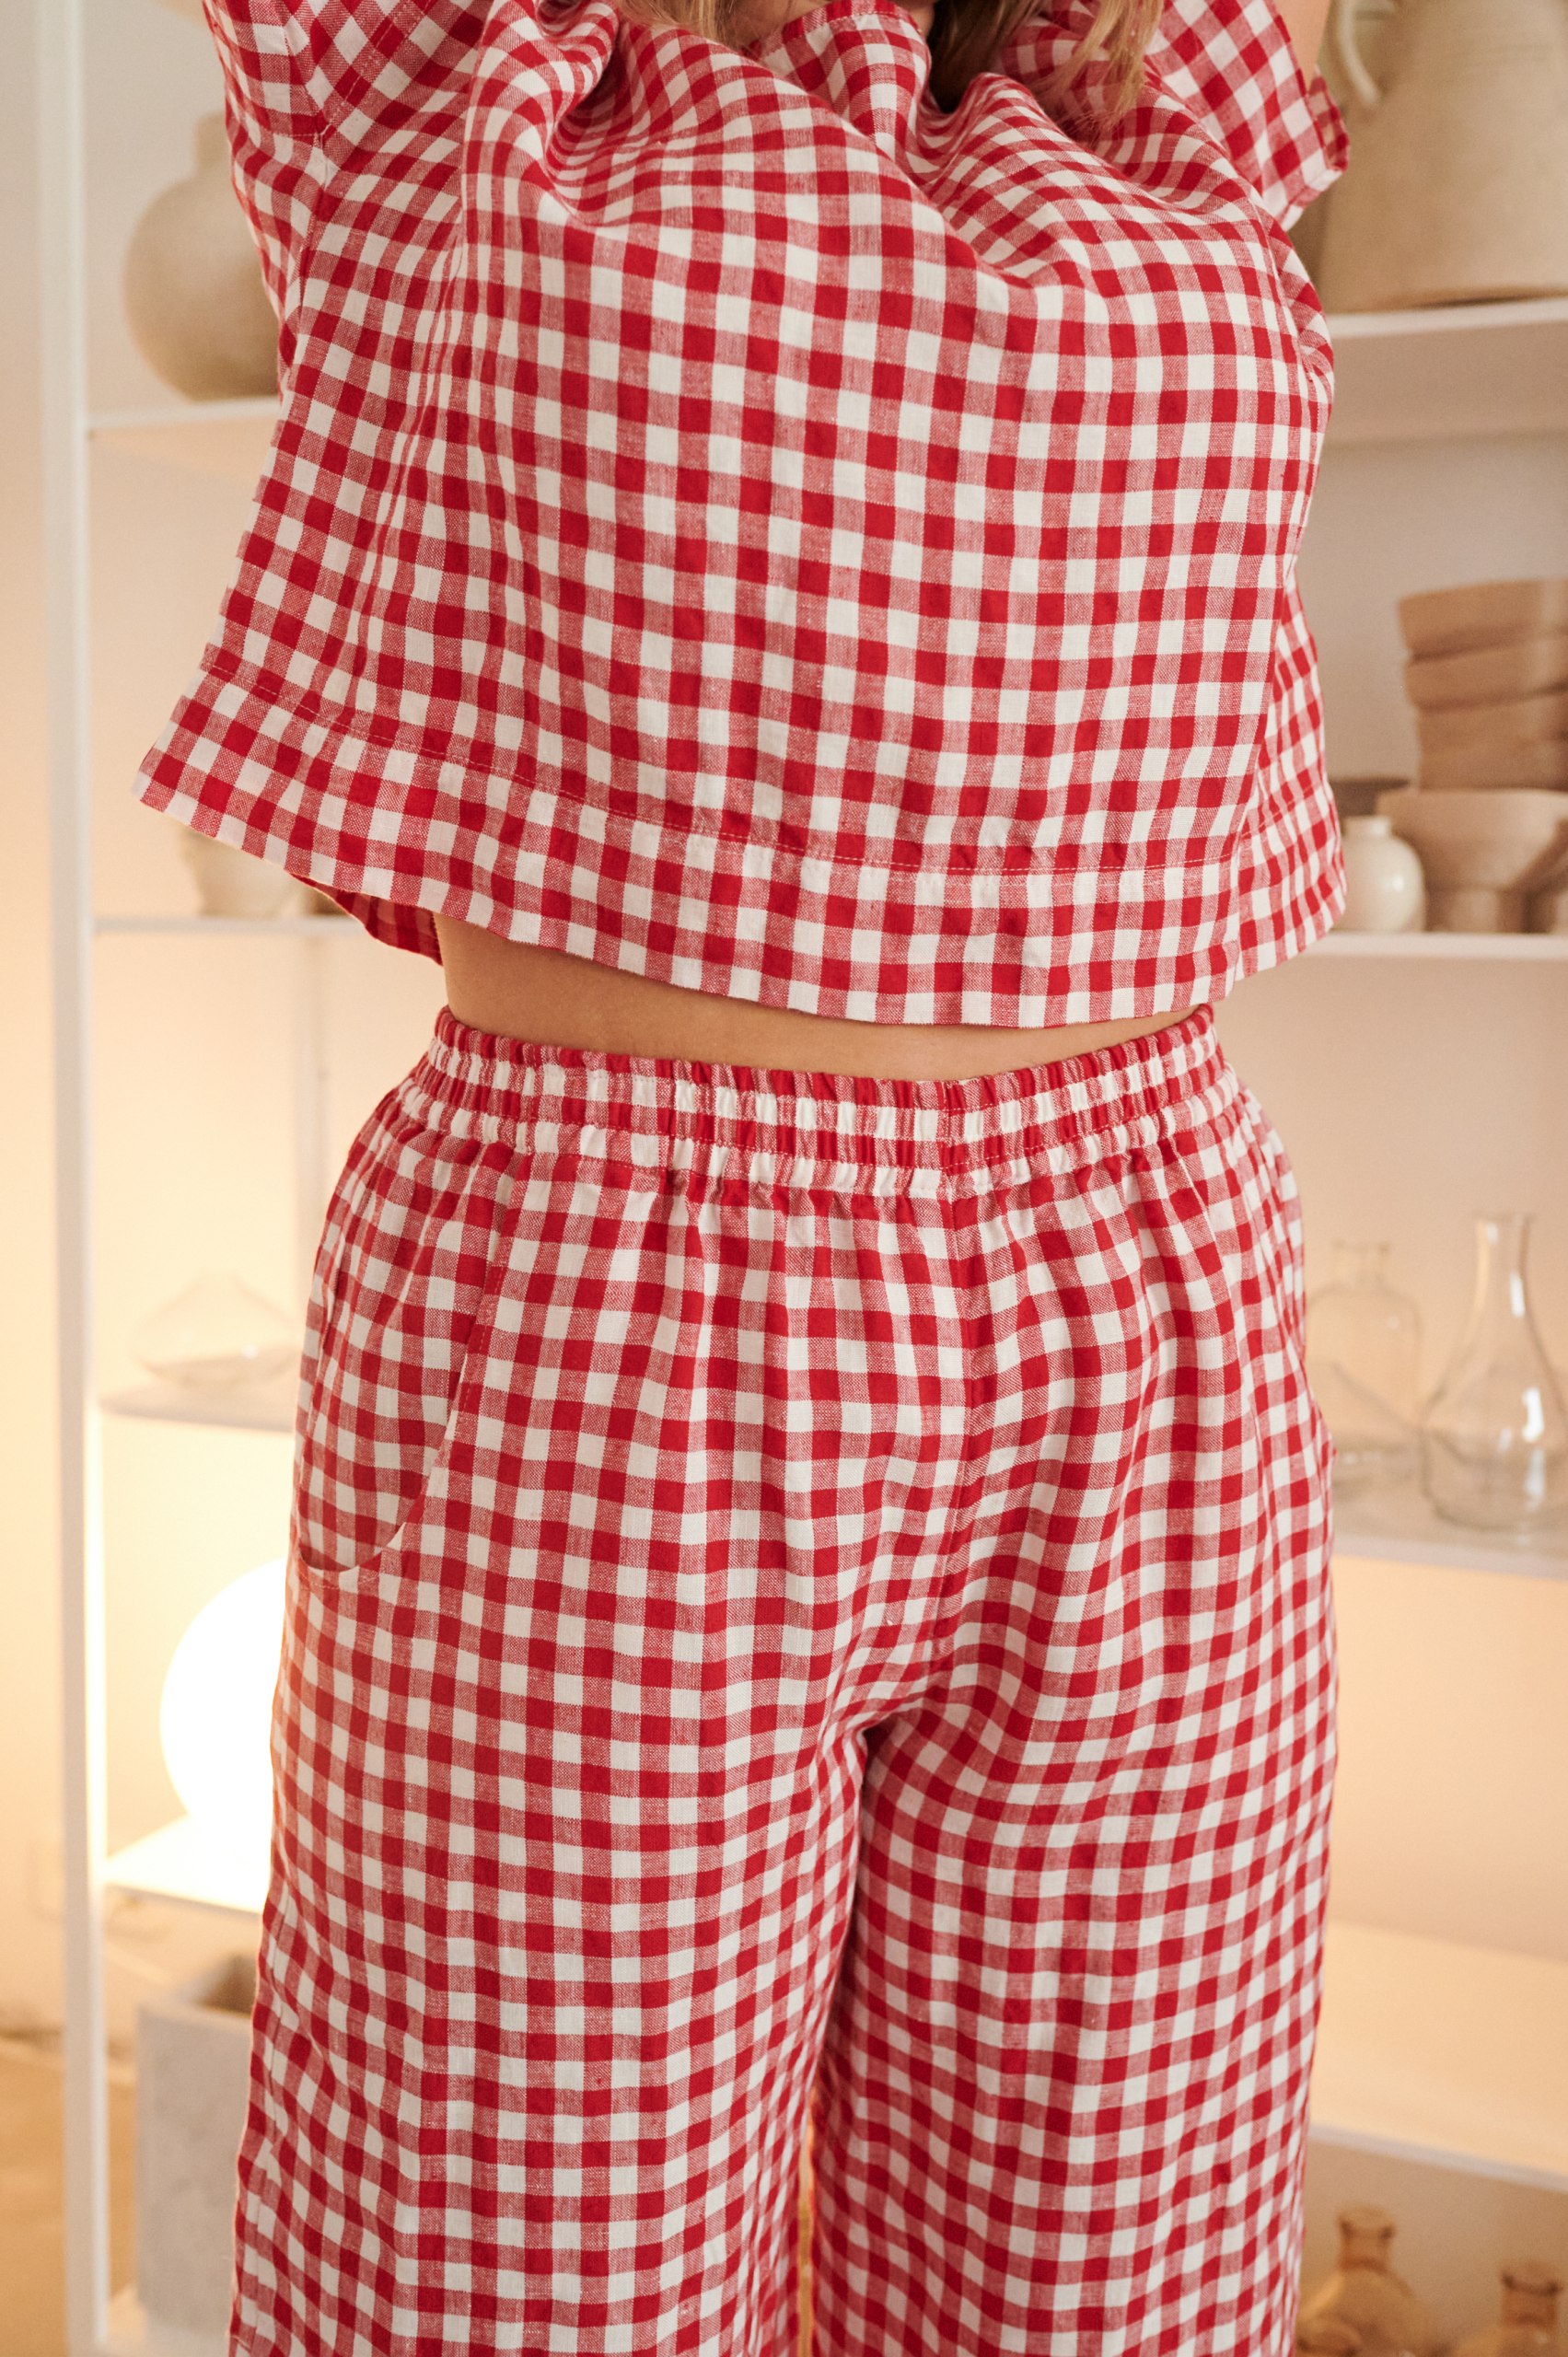 The elasticated waistband of summer linen trousers in red gingham